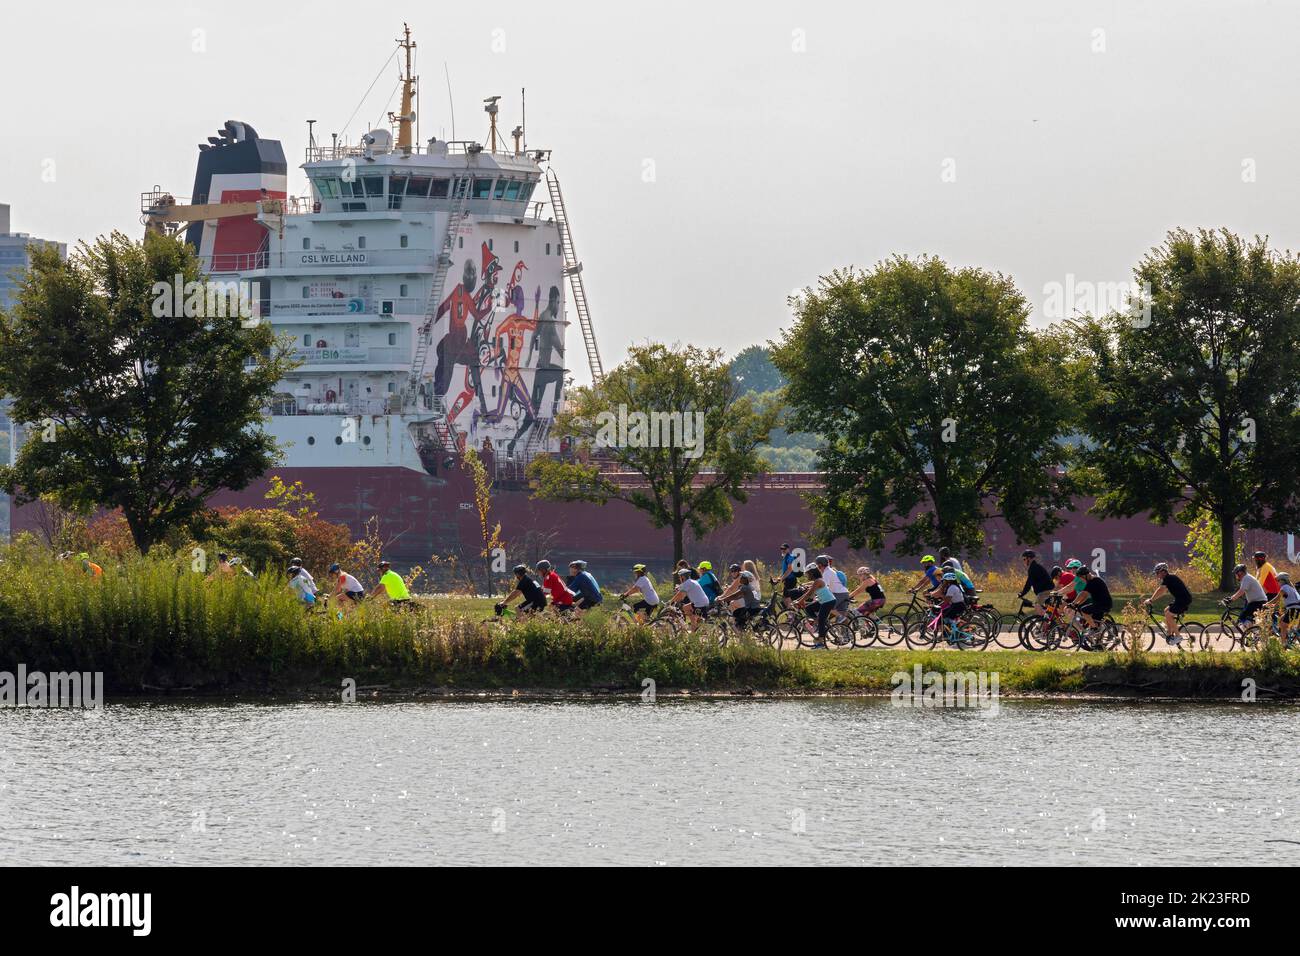 Detroit, Michigan - Thousands of riders joined the 2022 Tour de Troit. As the Tour rode on Belle Isle, Canada Steamship Line's CSL Welland passed on t Stock Photo